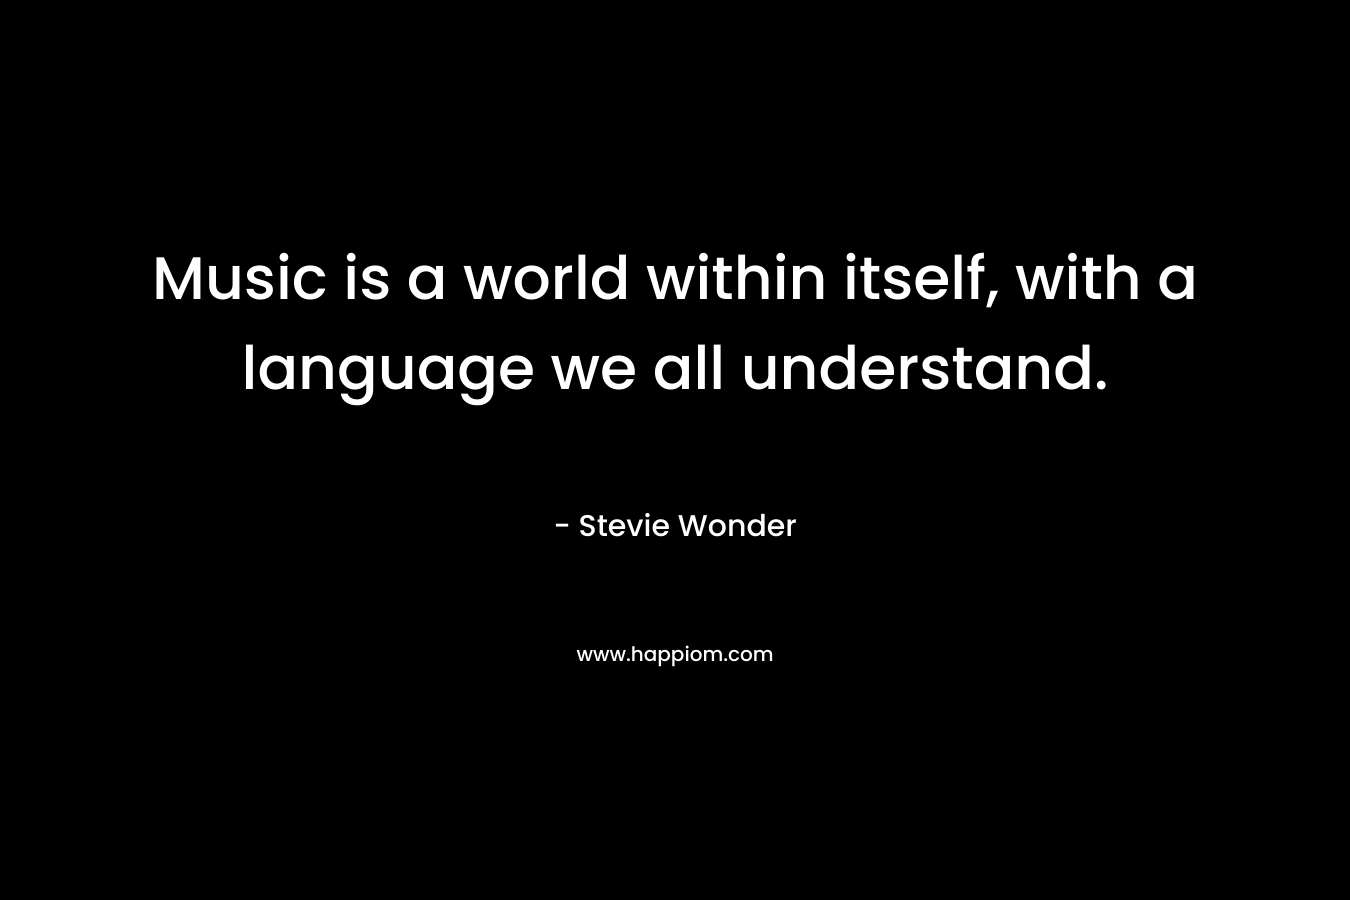 Music is a world within itself, with a language we all understand.